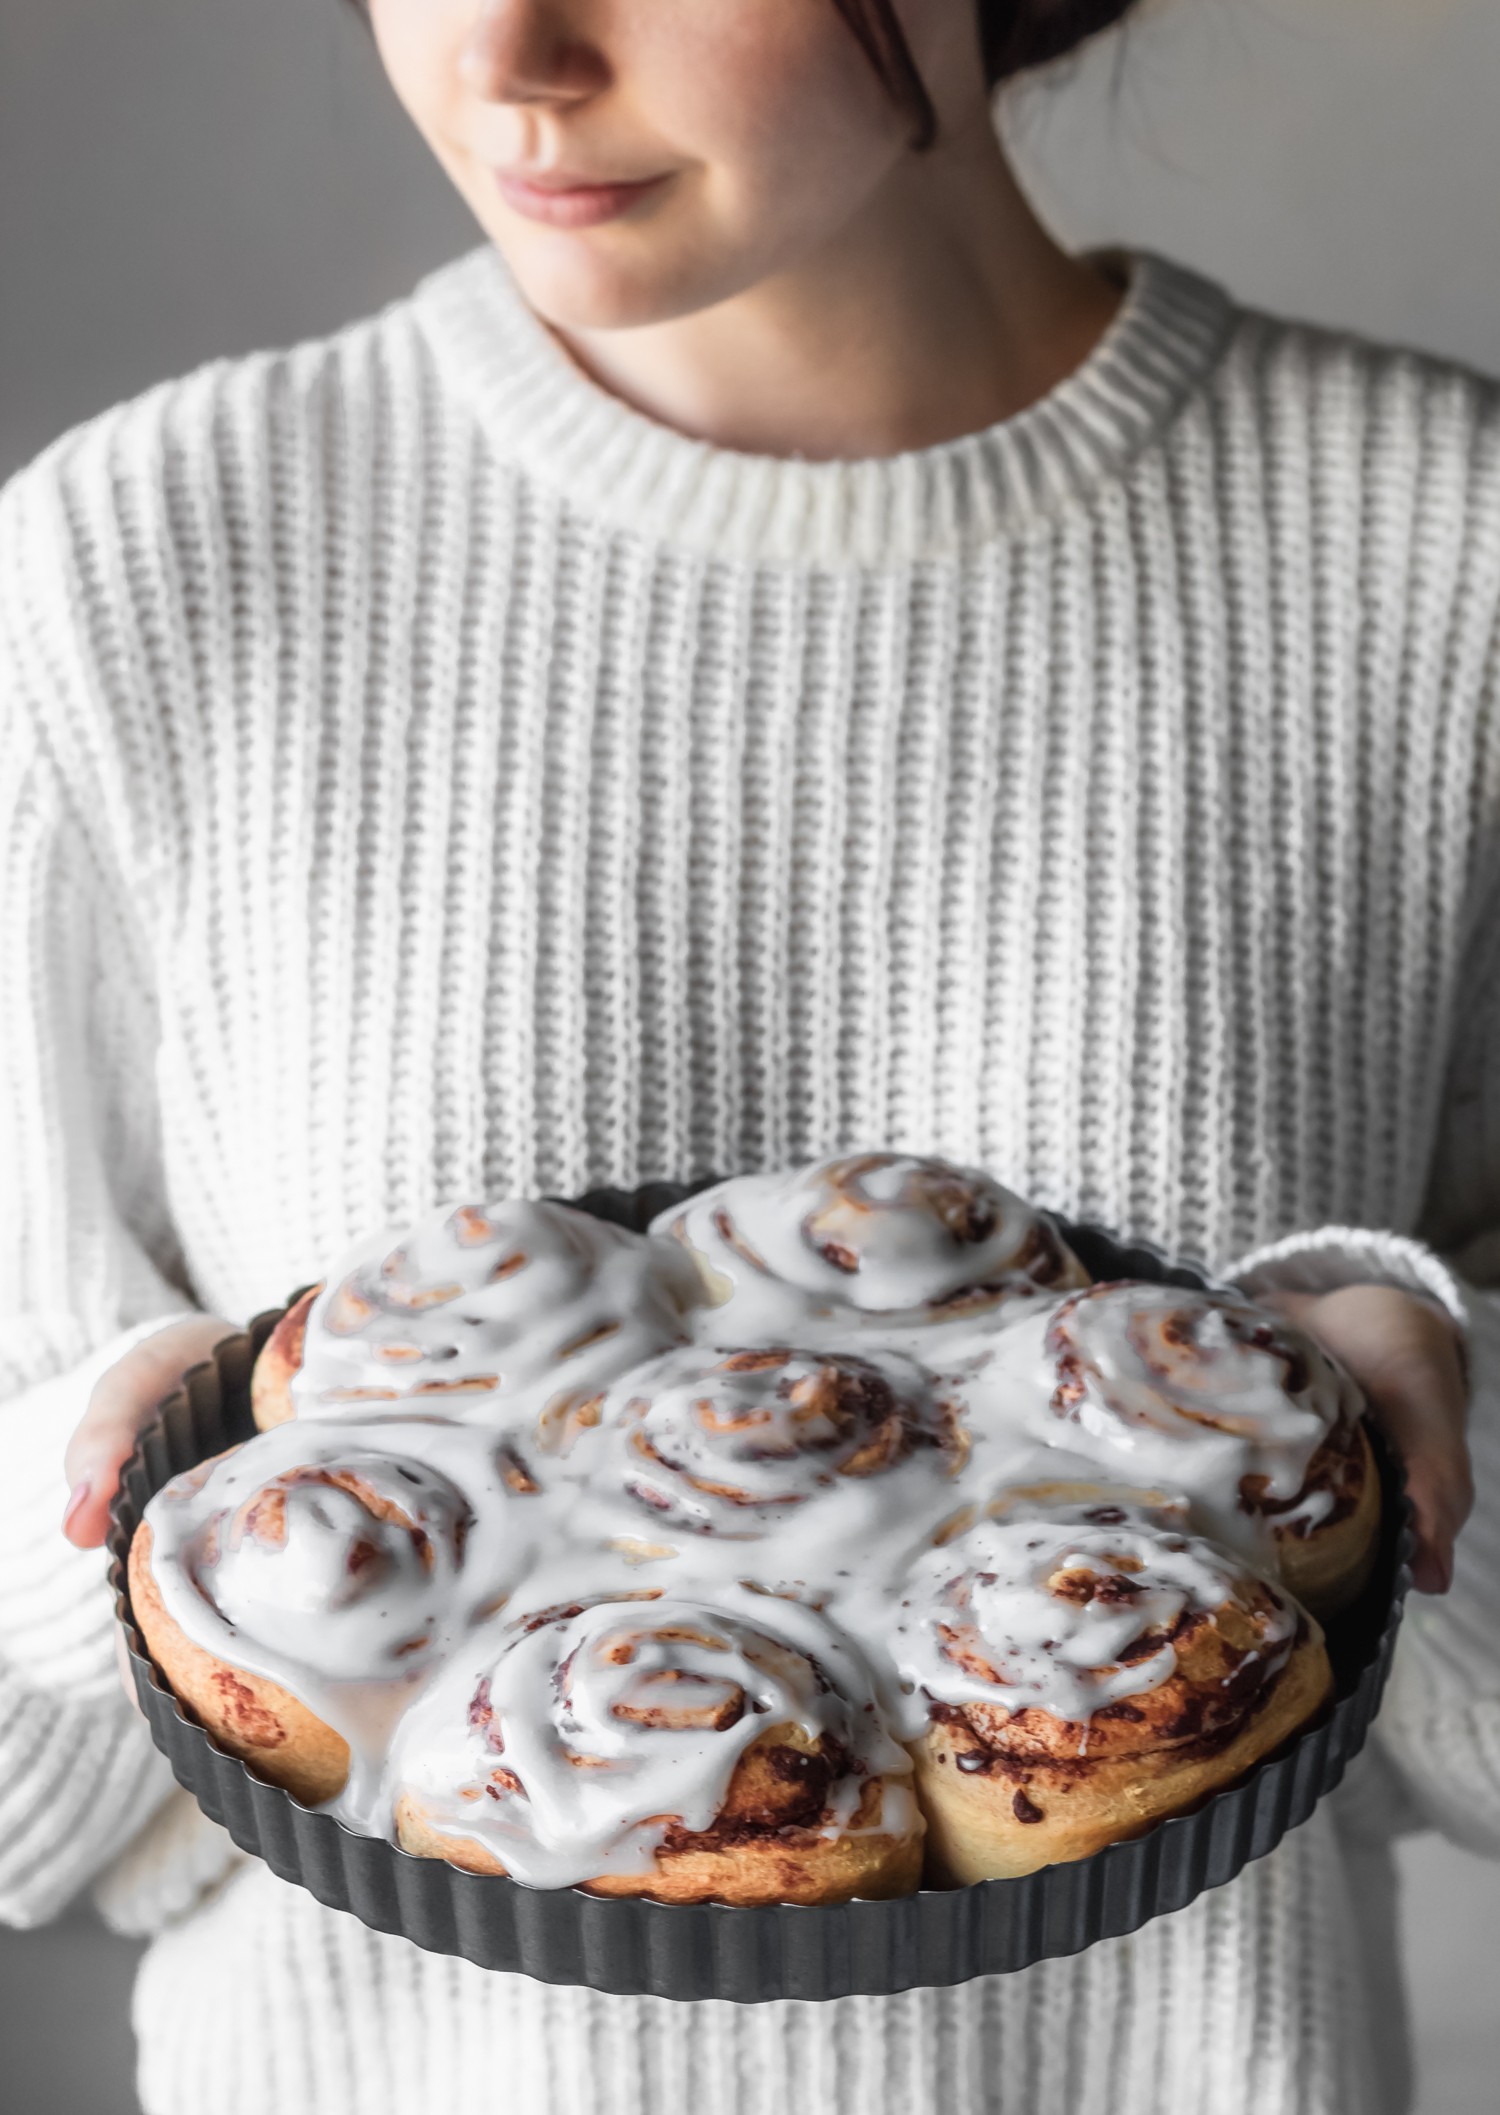 A side image of a woman wearing a white sweater holding a metal tray of iced cinnamon buns.